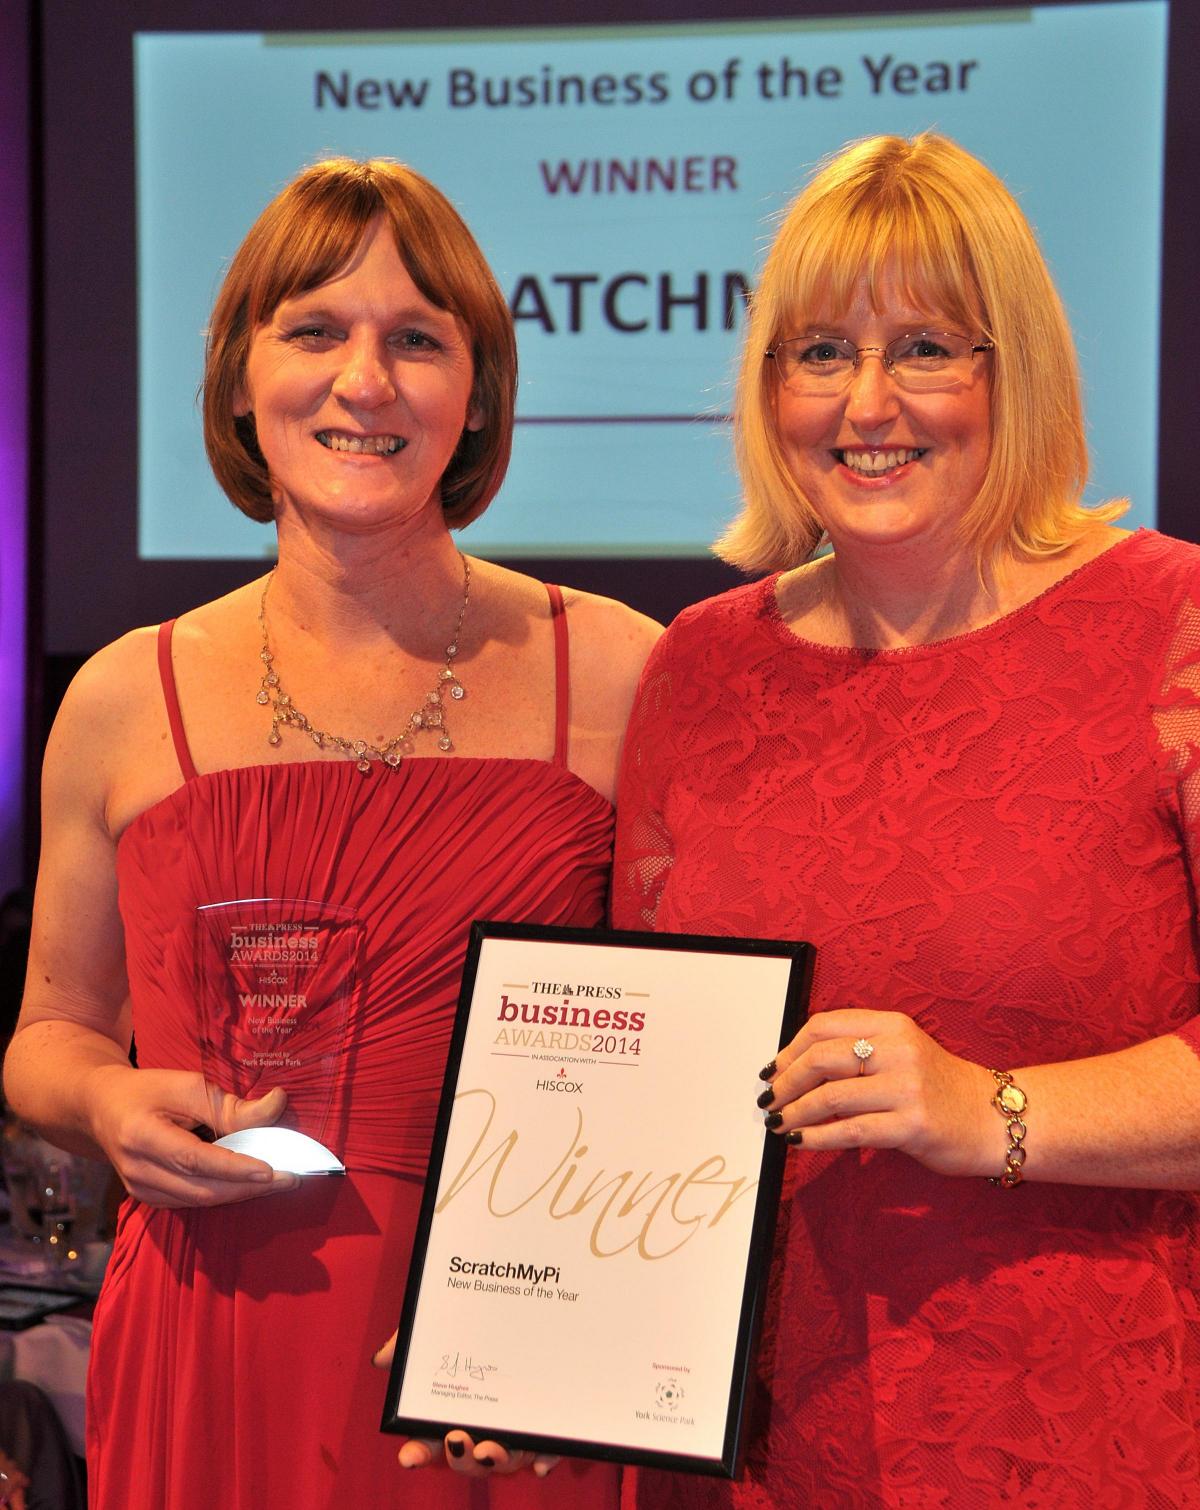 Robyn Duckworth, left, from ScratchMyPi, receives the award for New Business of the Year from Tracey Smith, managing director of sponsors York Science Park